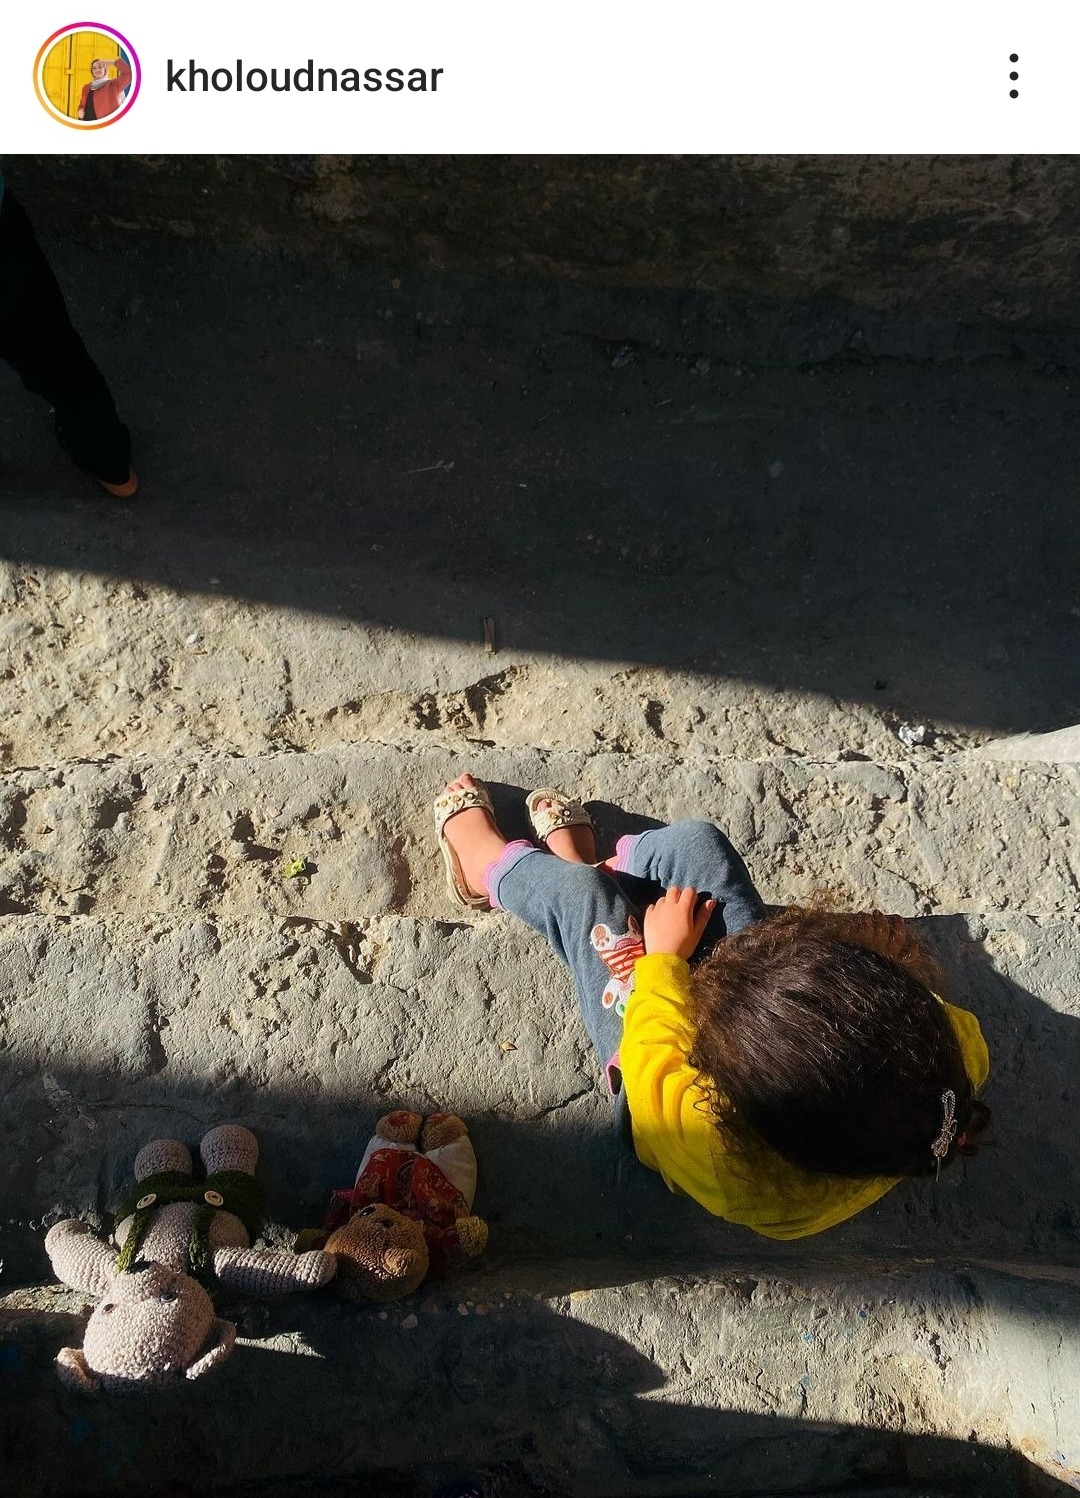 An overhead shot of a small child sitting on the ground, exhausted.